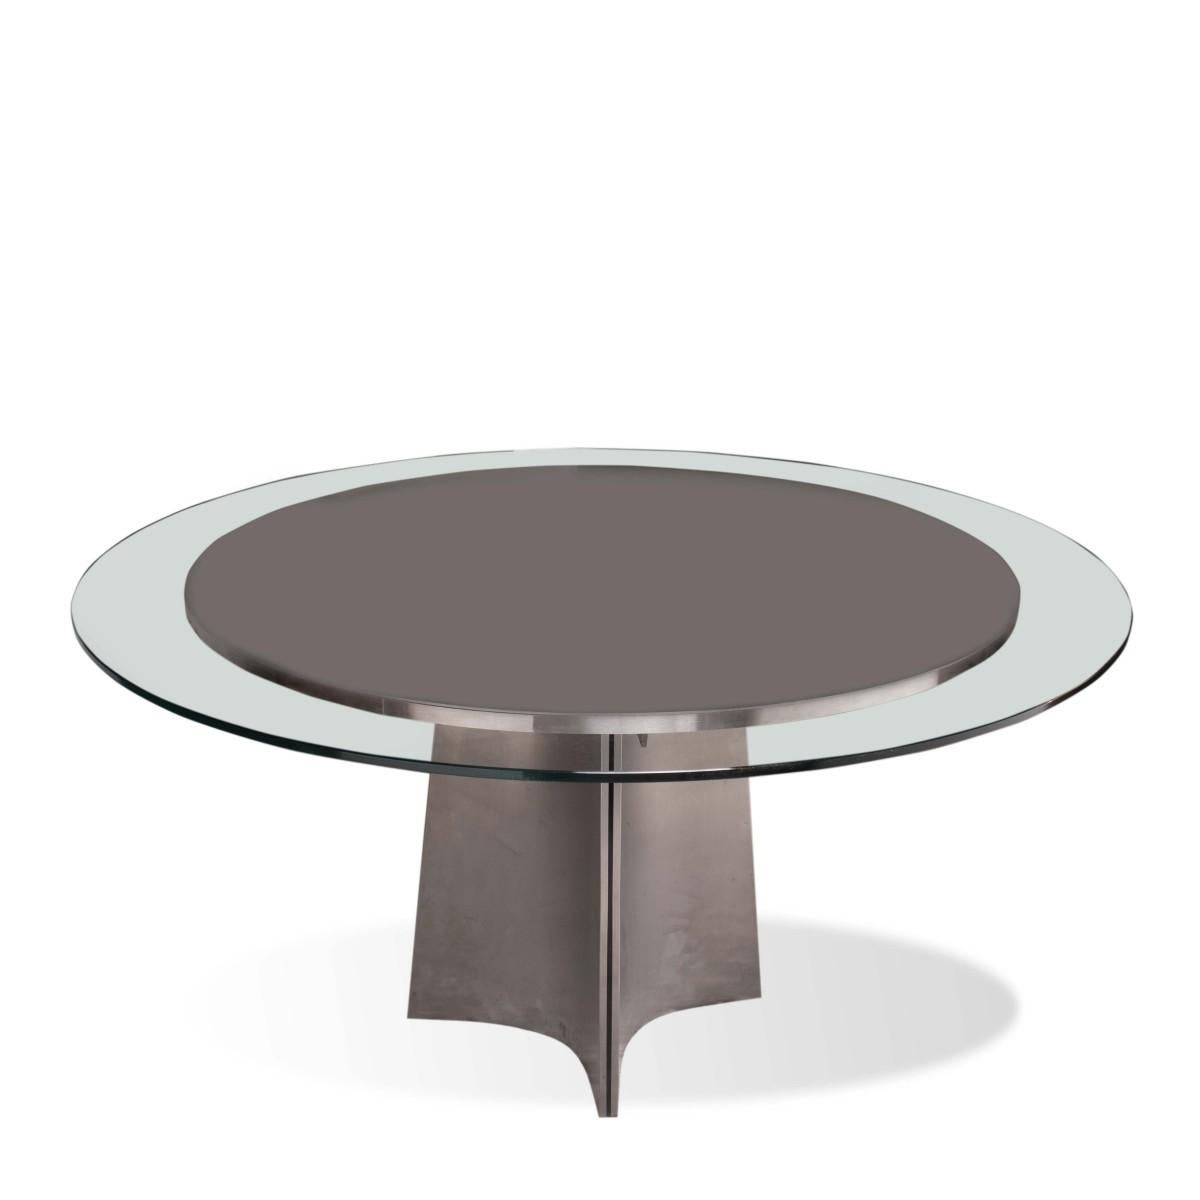 A Minimalist dining table with round glass top and brushed steel base for Arrmet. Reminiscent of designs by Maison Jansen. Italy, circa 1970. 

Dimensions: 52 inches W x 29 inches H.